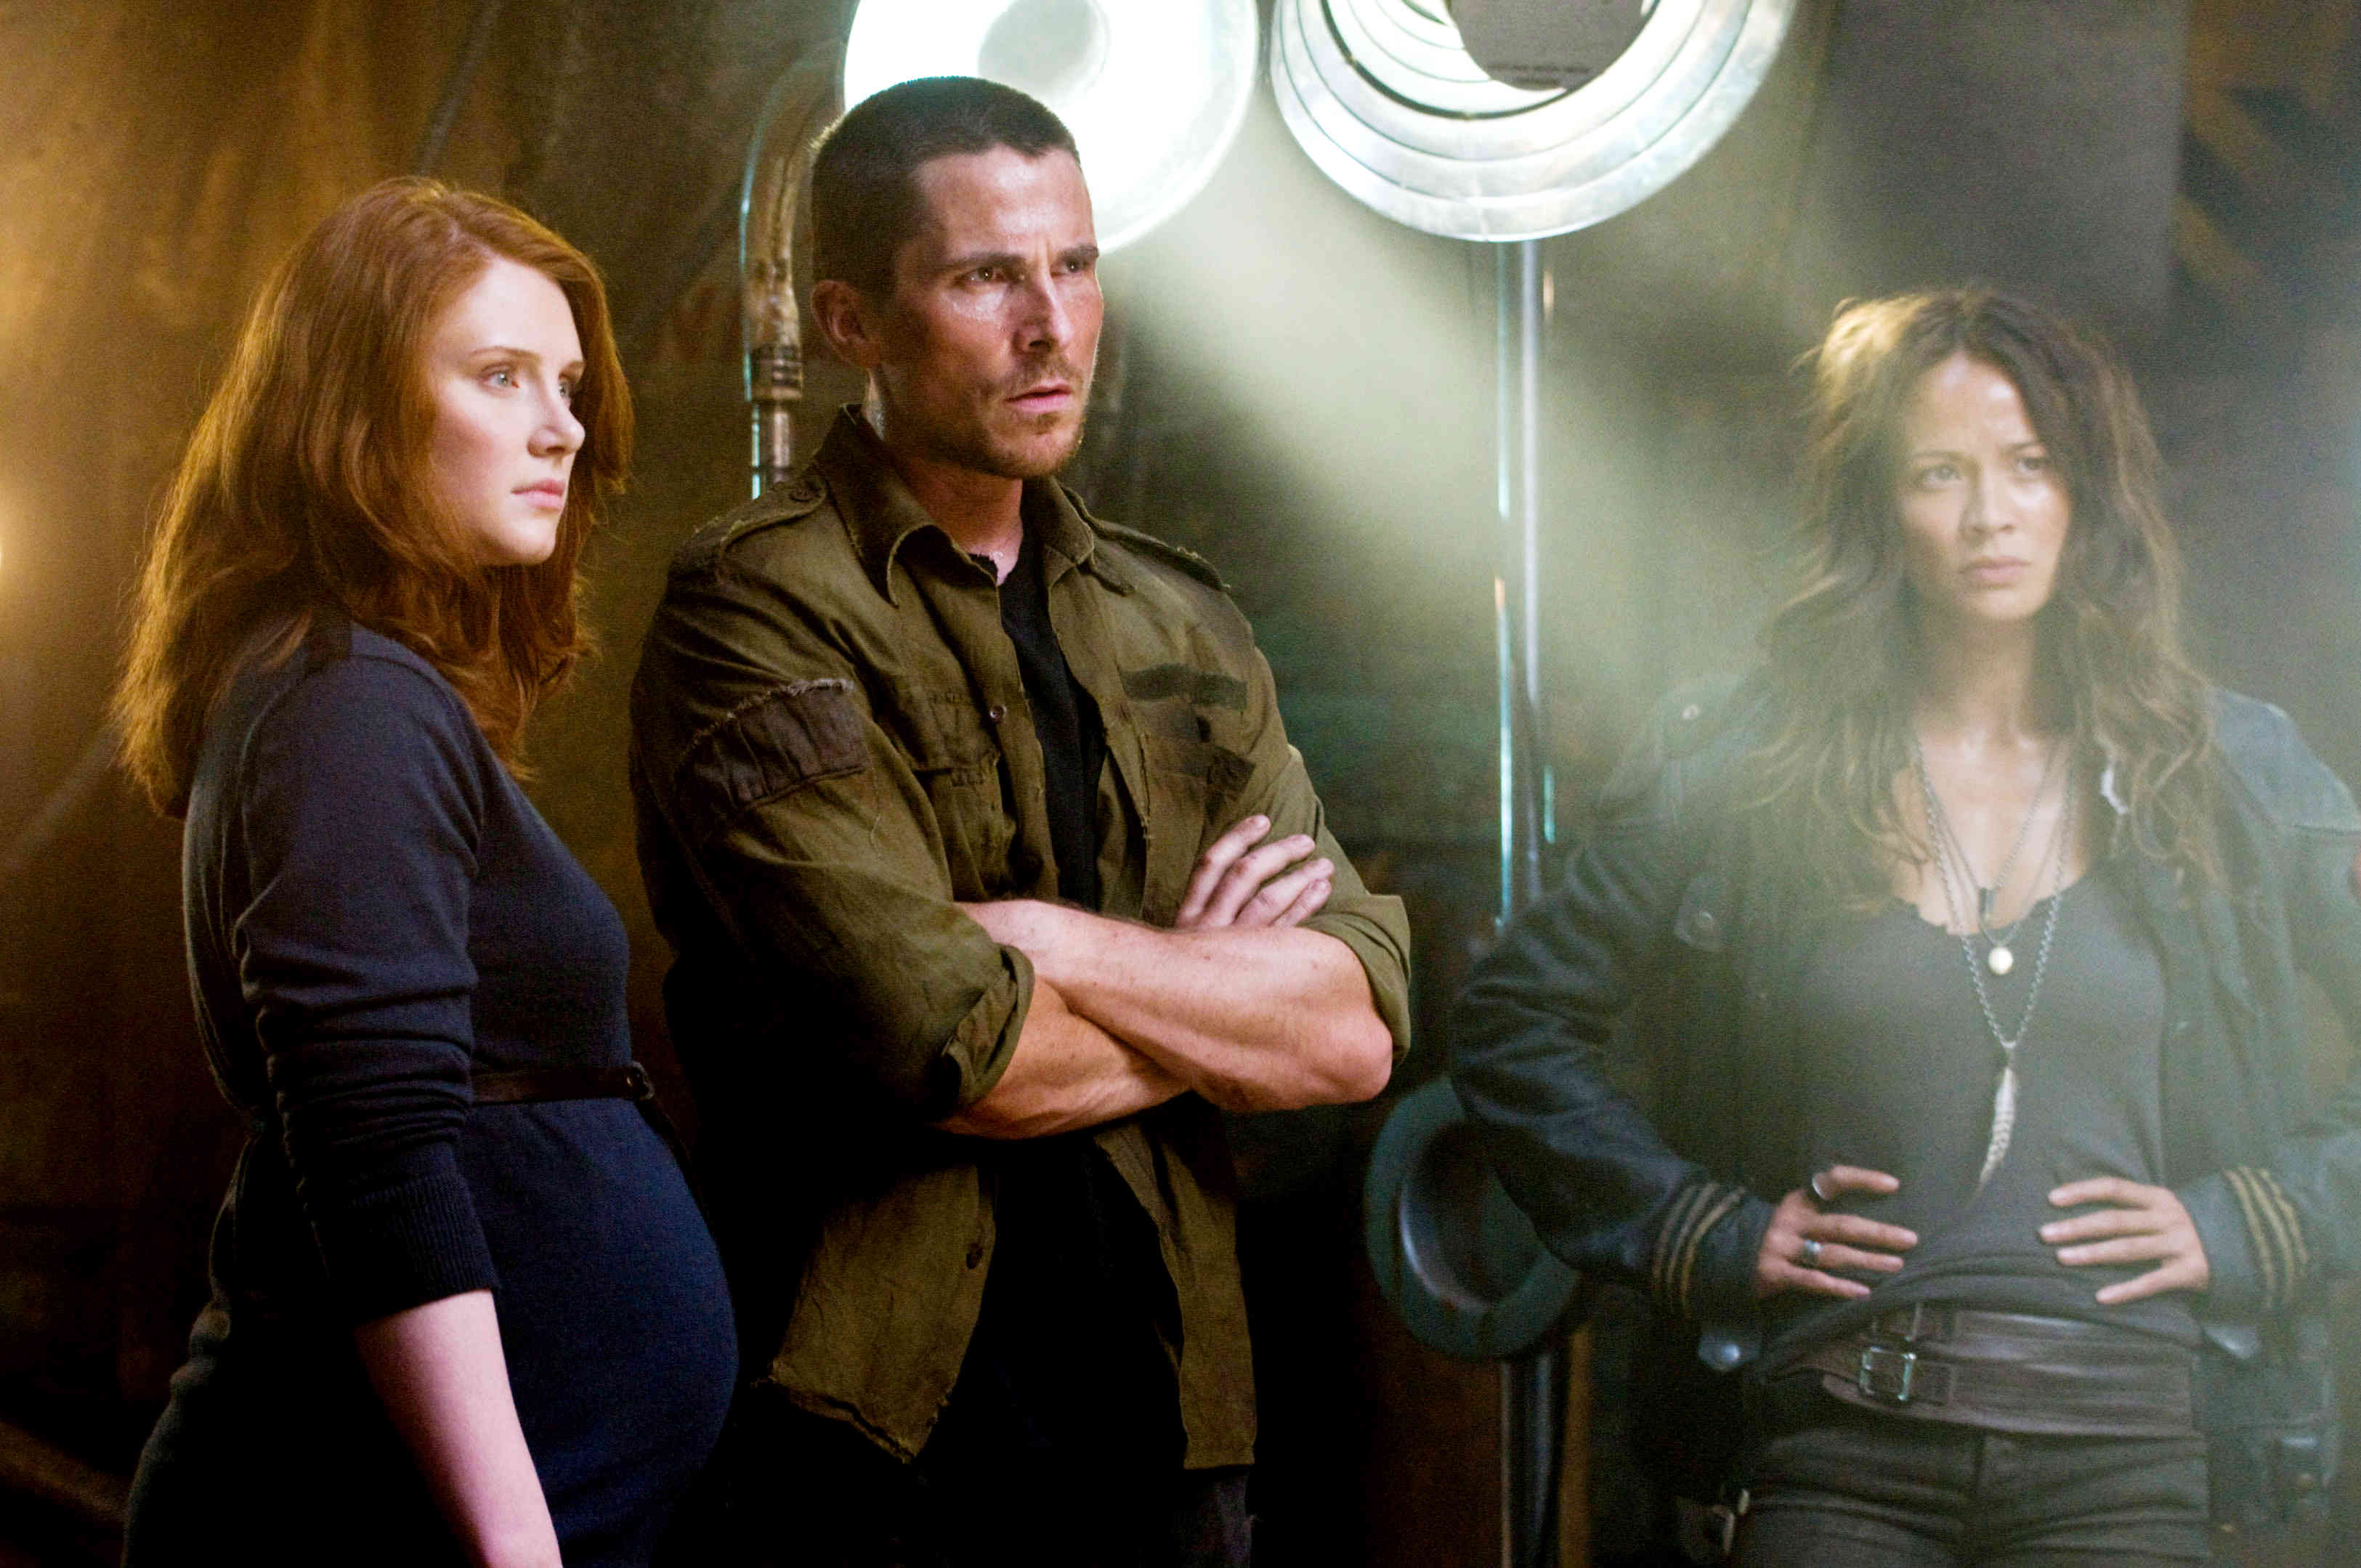 Bryce Dallas Howard, Christian Bale and Moon Bloodgood in Warner Bros. Pictures' Terminator Salvation (2009)